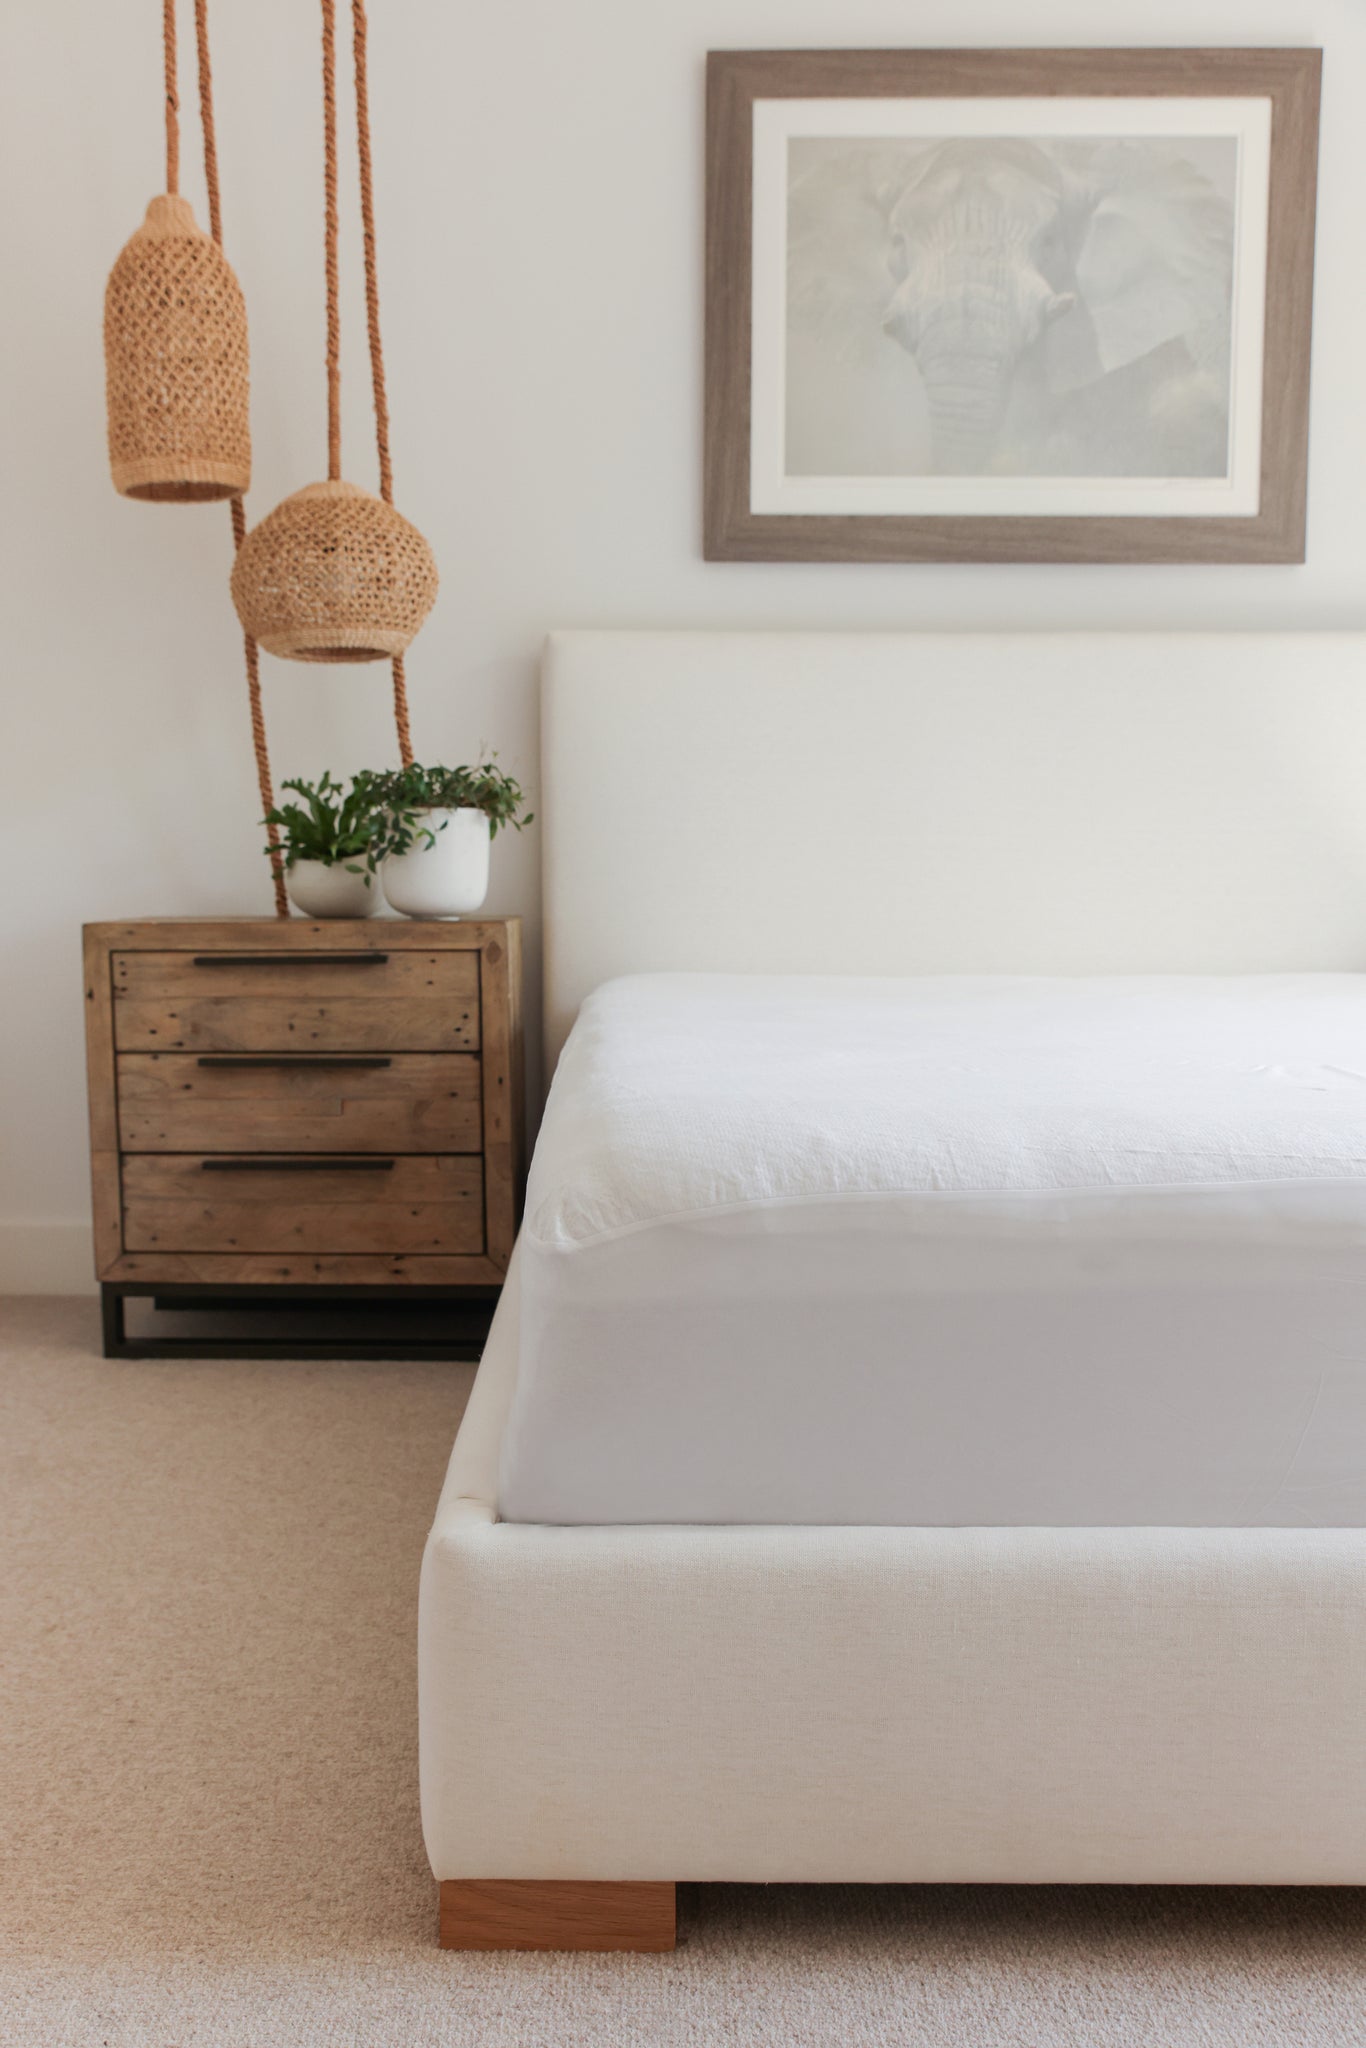 A comfortable night's sleep with a soft mattress protector